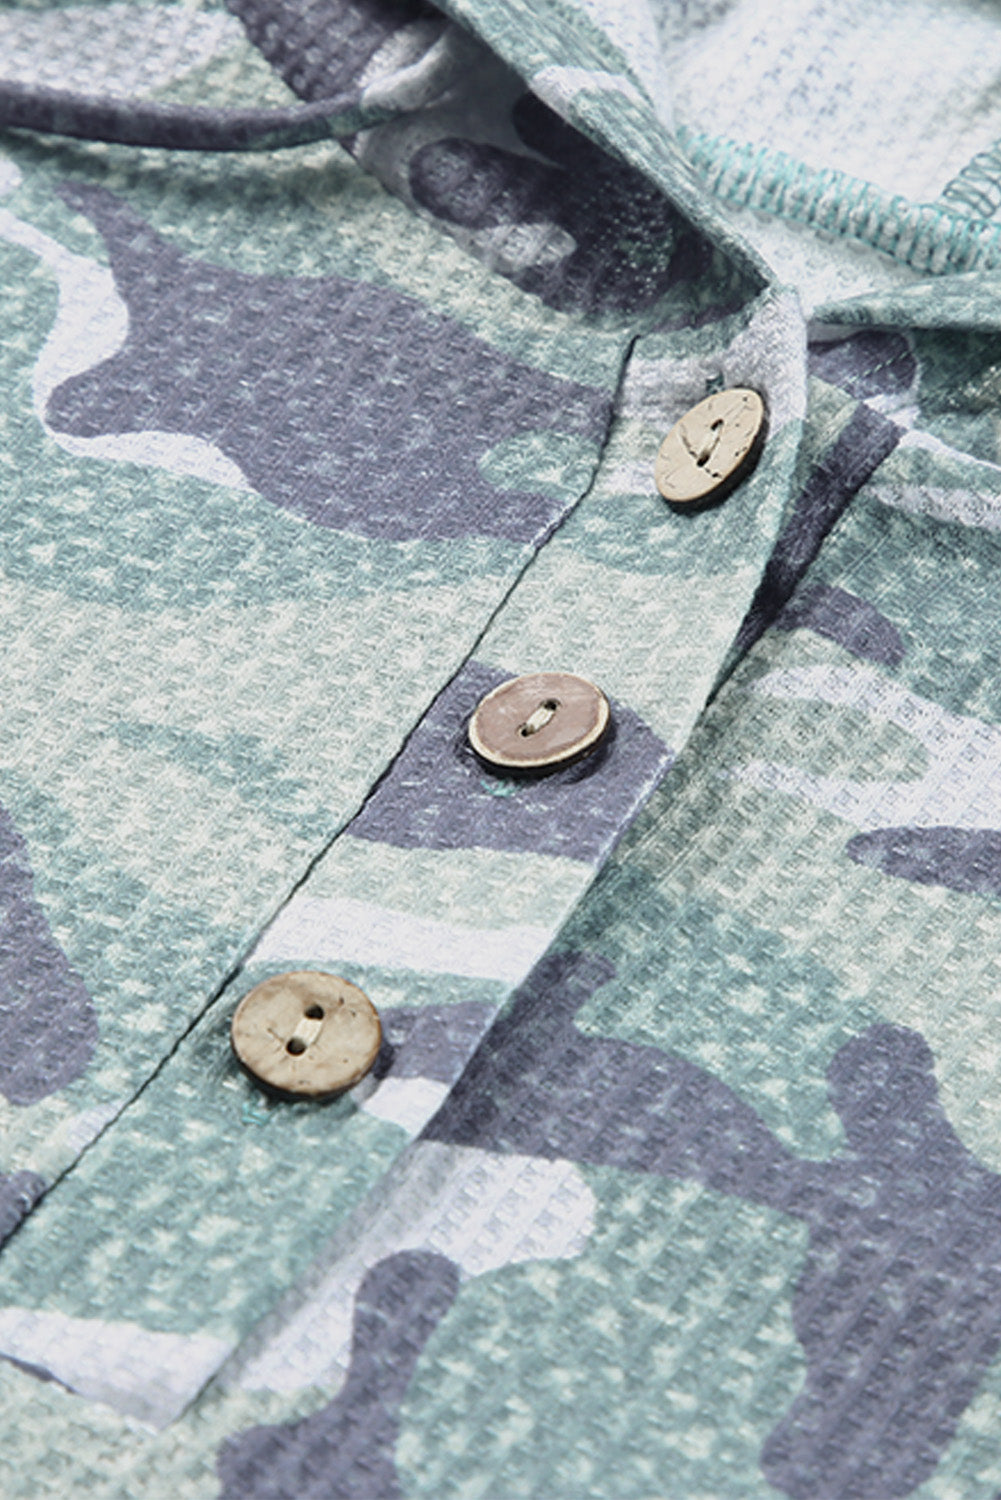 Green Camo Print Button Front Oversize Hoodie